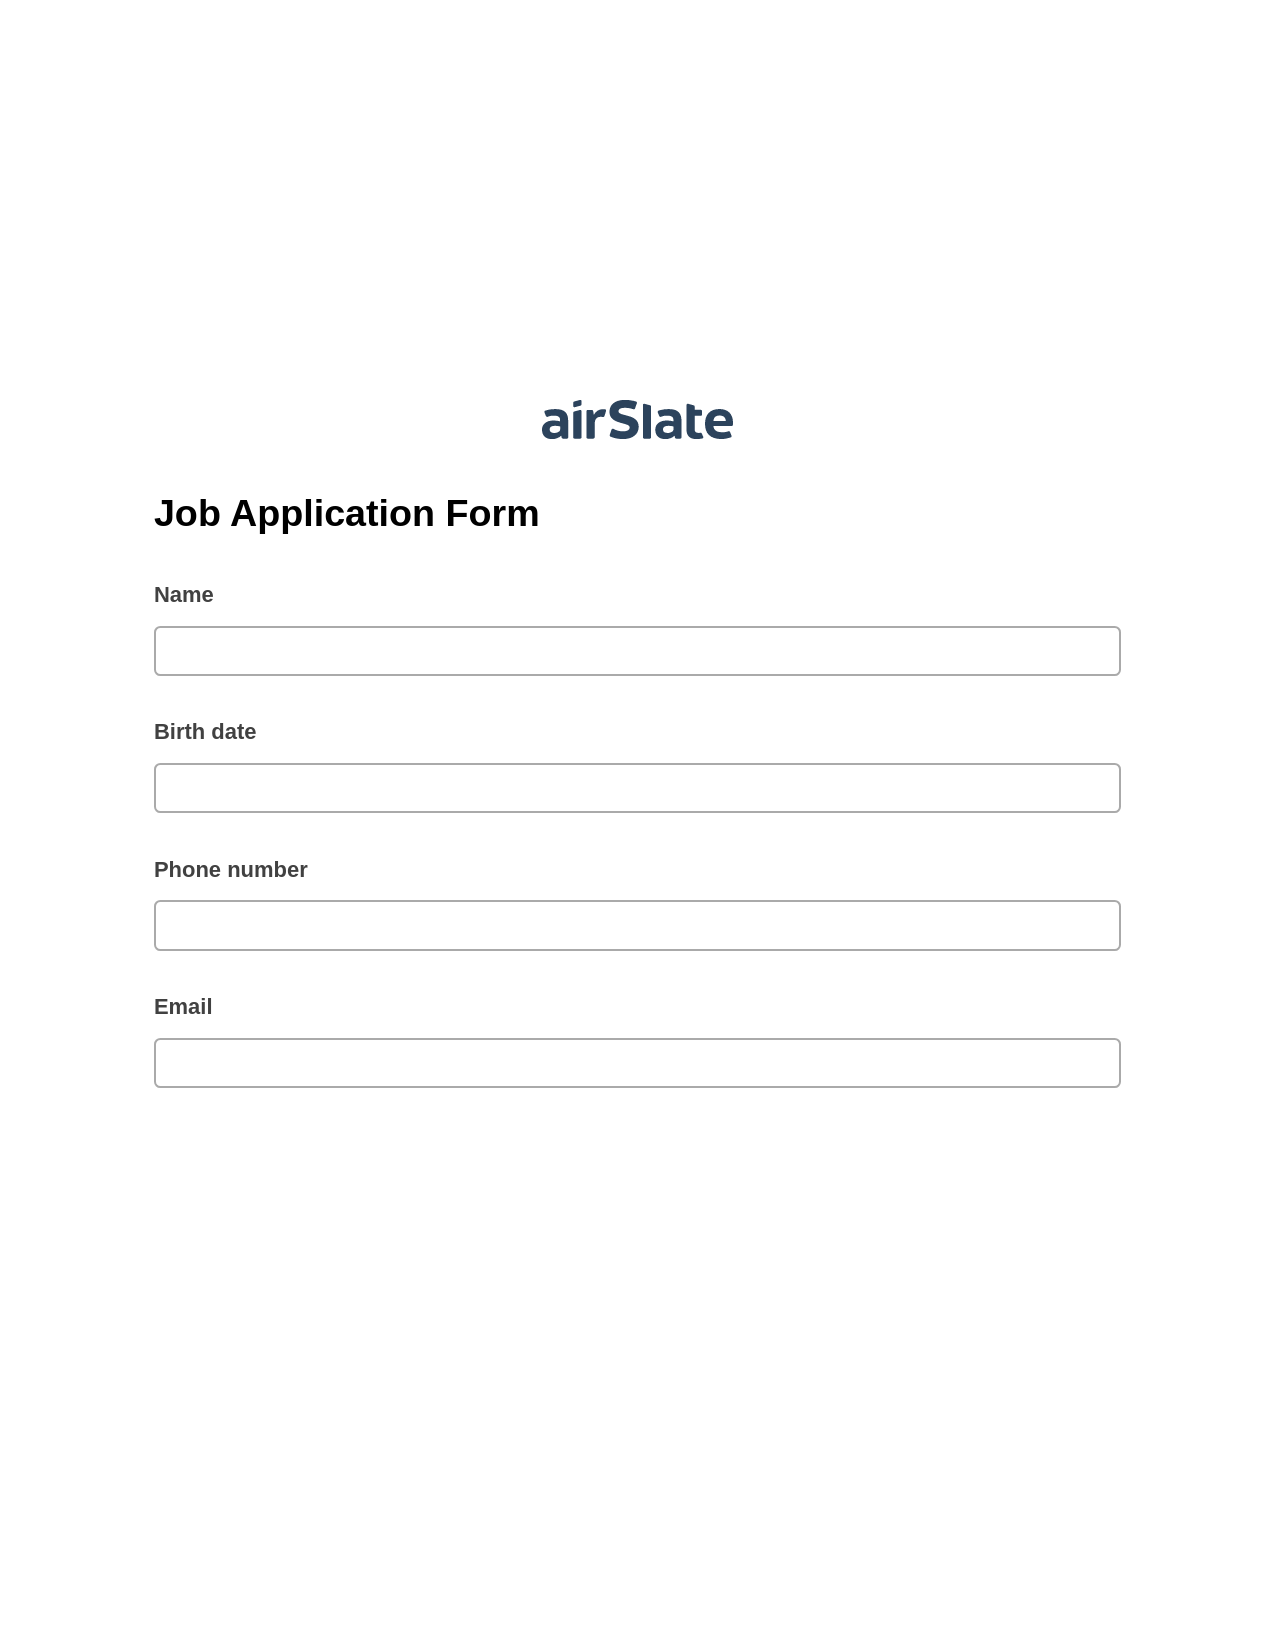 Multirole Job Application Form Pre-fill Dropdown from Airtable, Text Message Notification Bot, Dropbox Bot